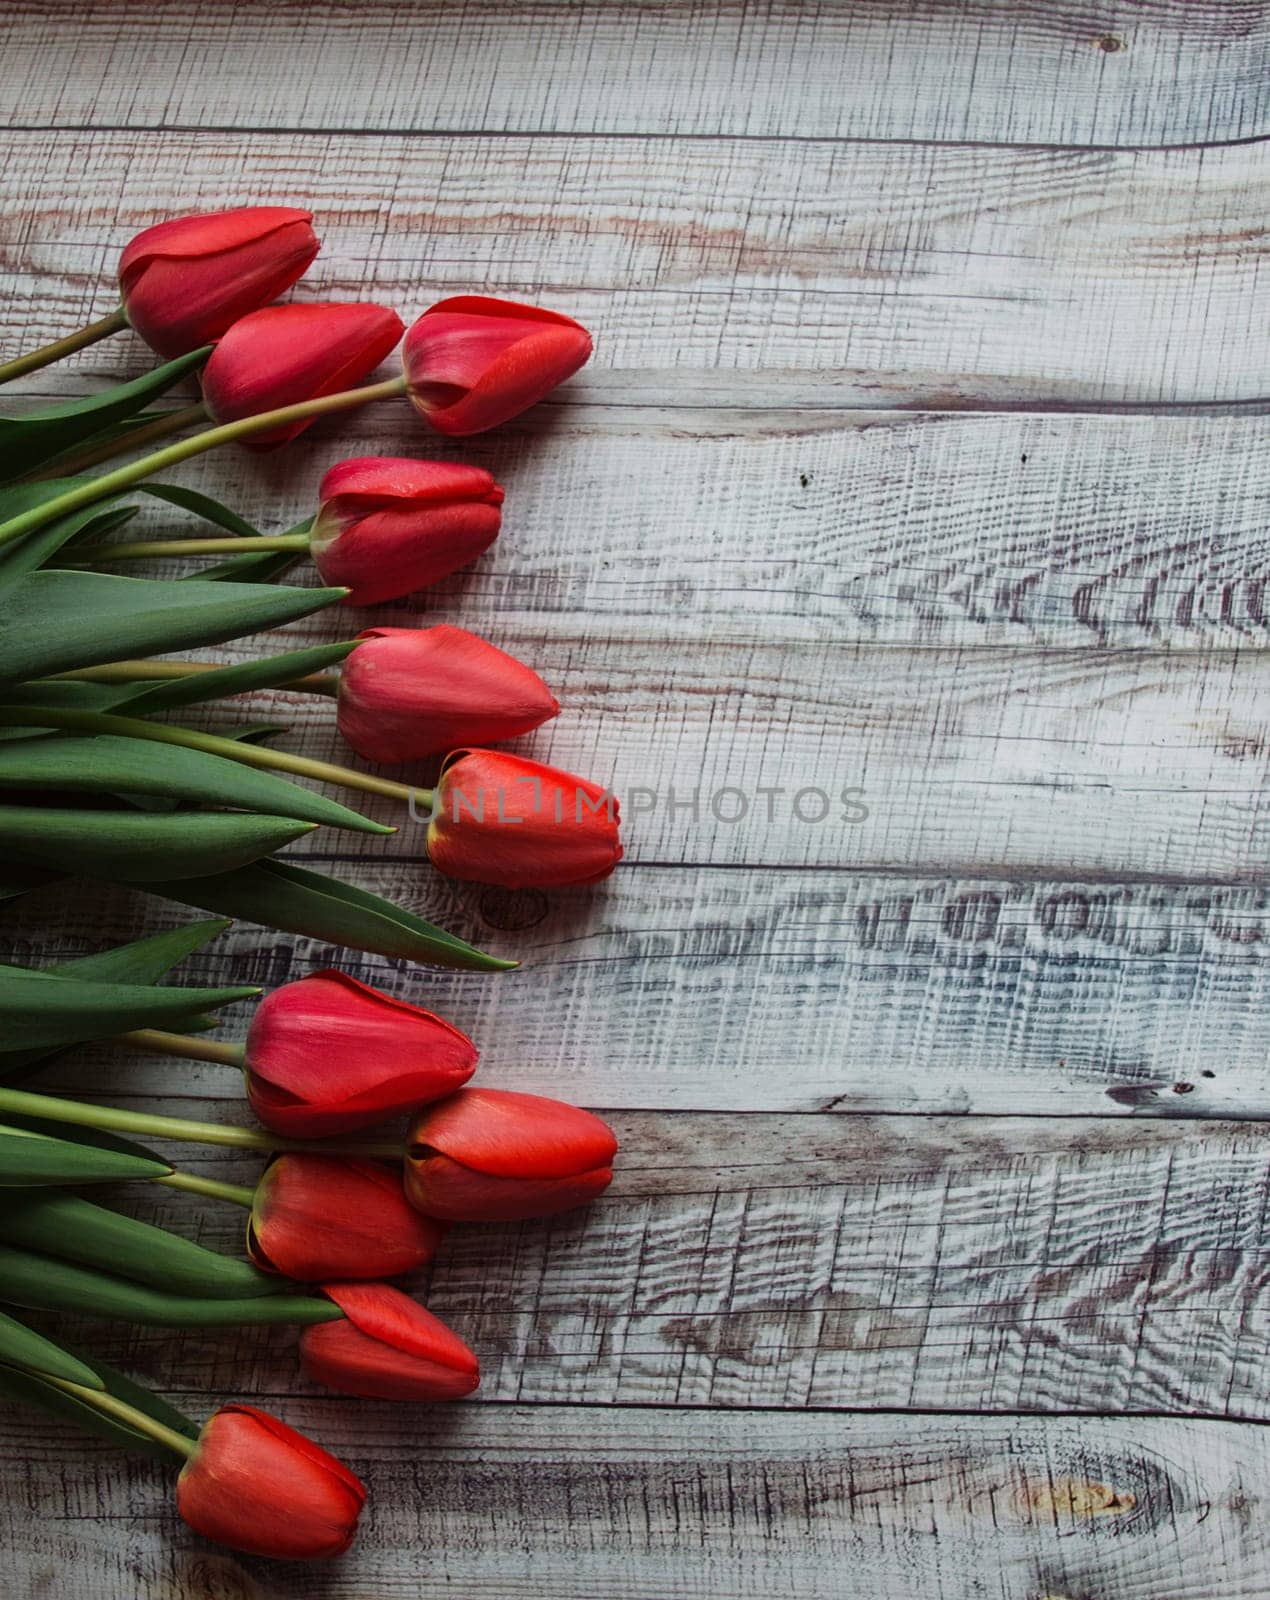 Red tulips with leaves lie on a wooden background